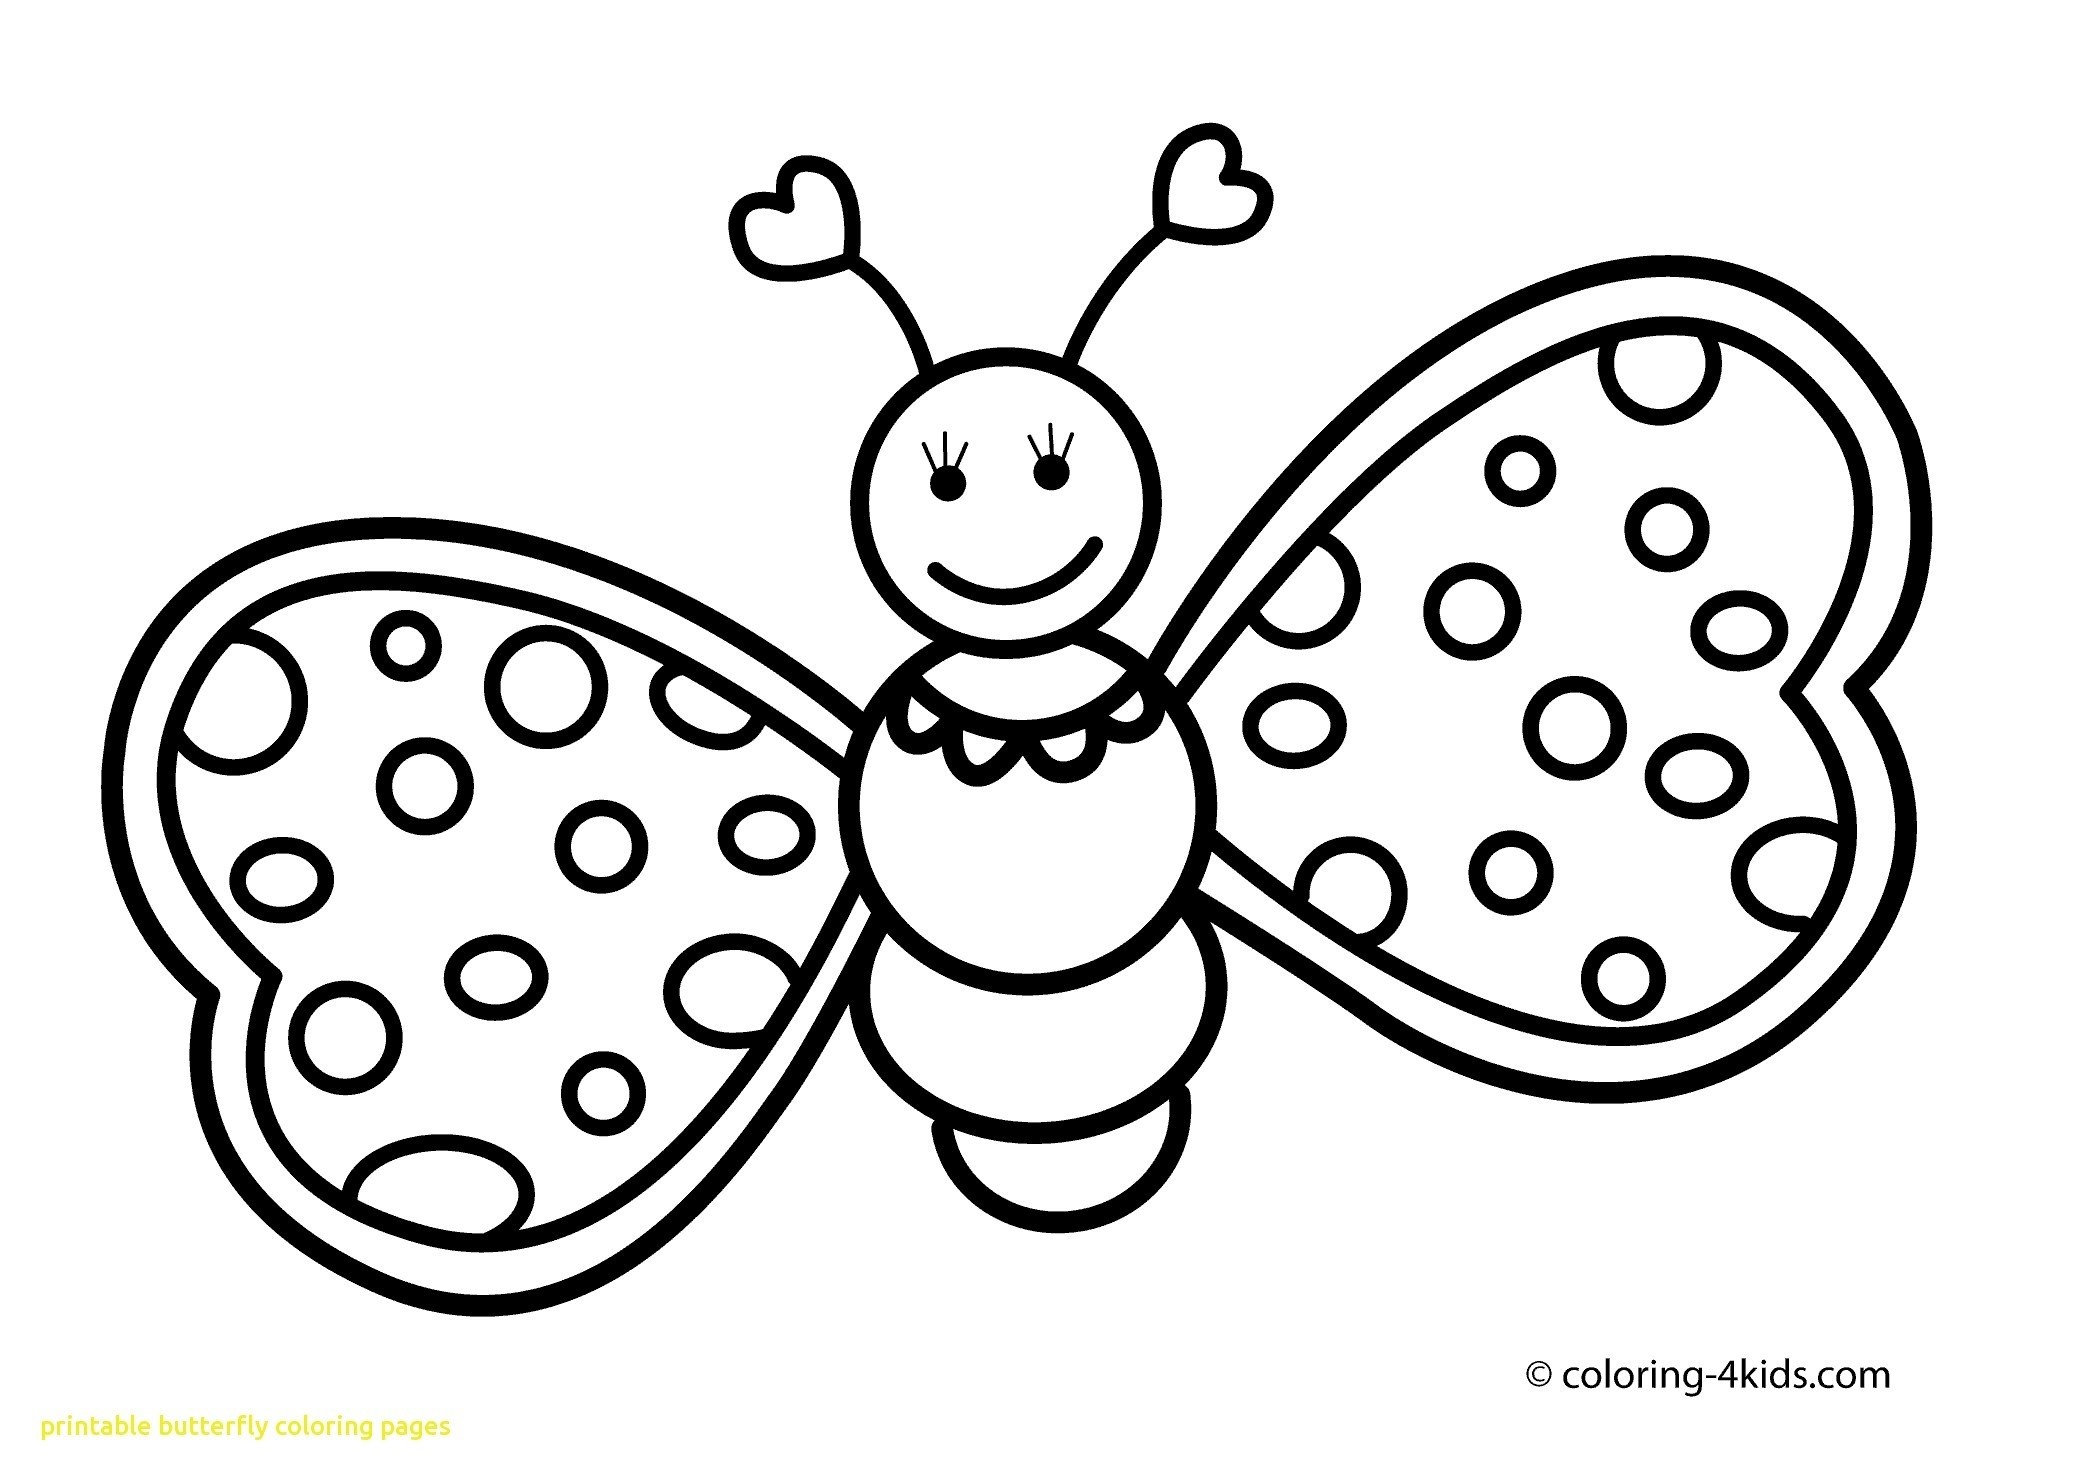 Coloring Pages : Butterfly Coloringages For Kidsicture Ideas ...